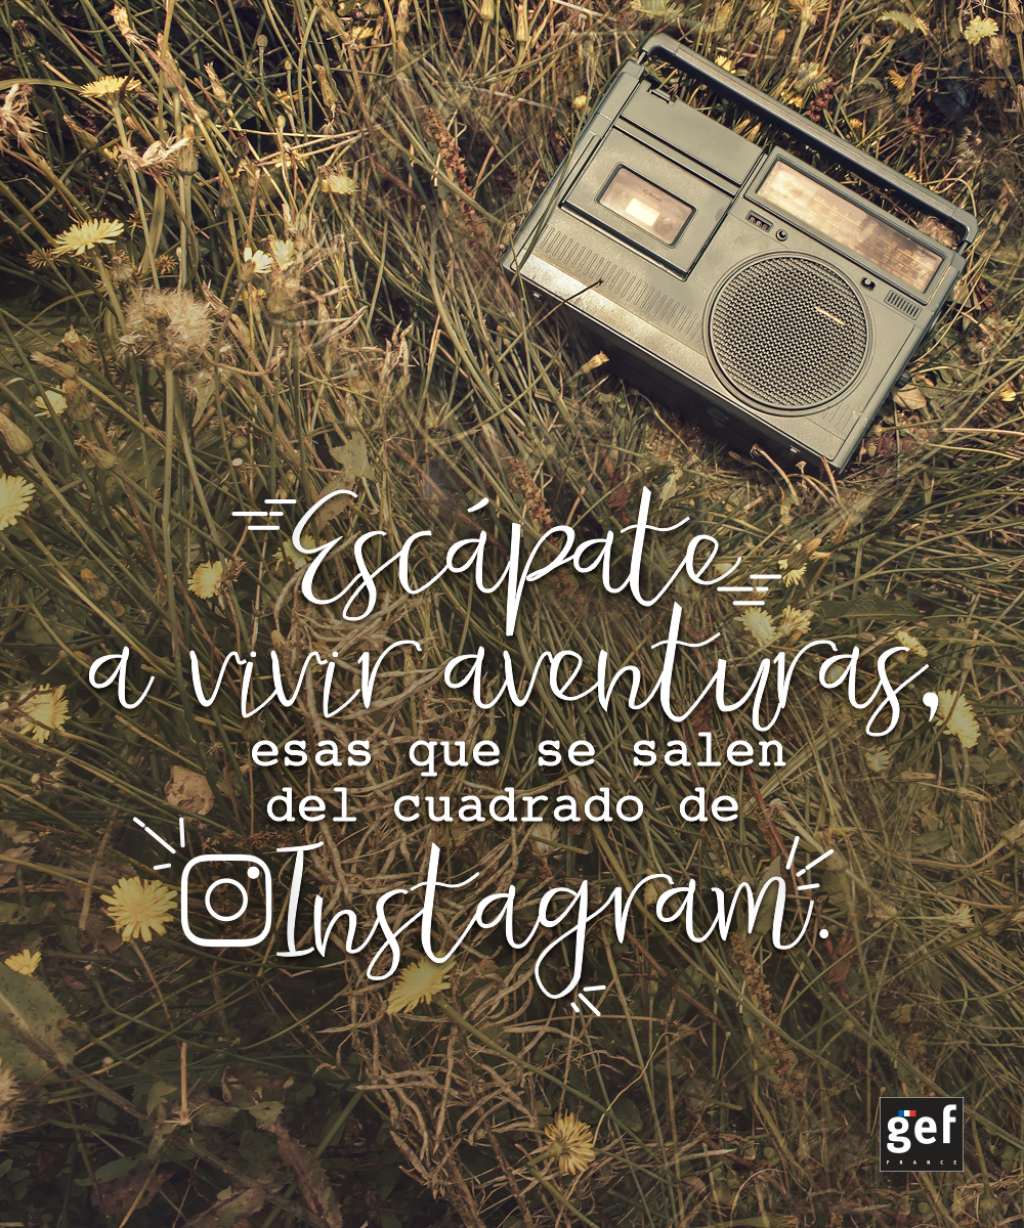 Picture of: Escápate a vivir aventura #Quotes #Inspiration #Frases #Quote